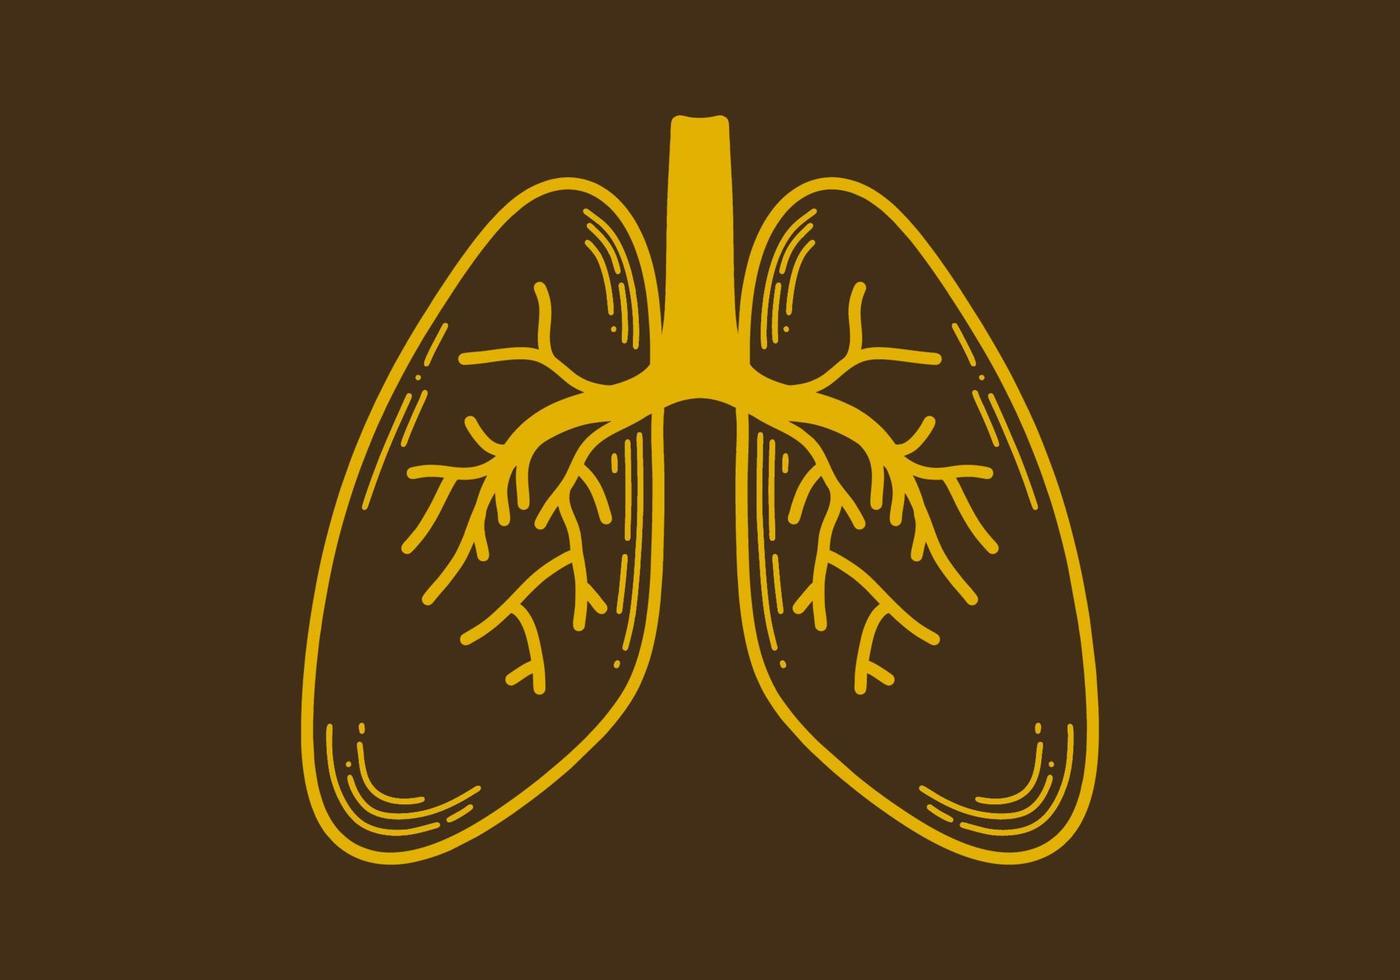 Retro style illustration of a lungs vector